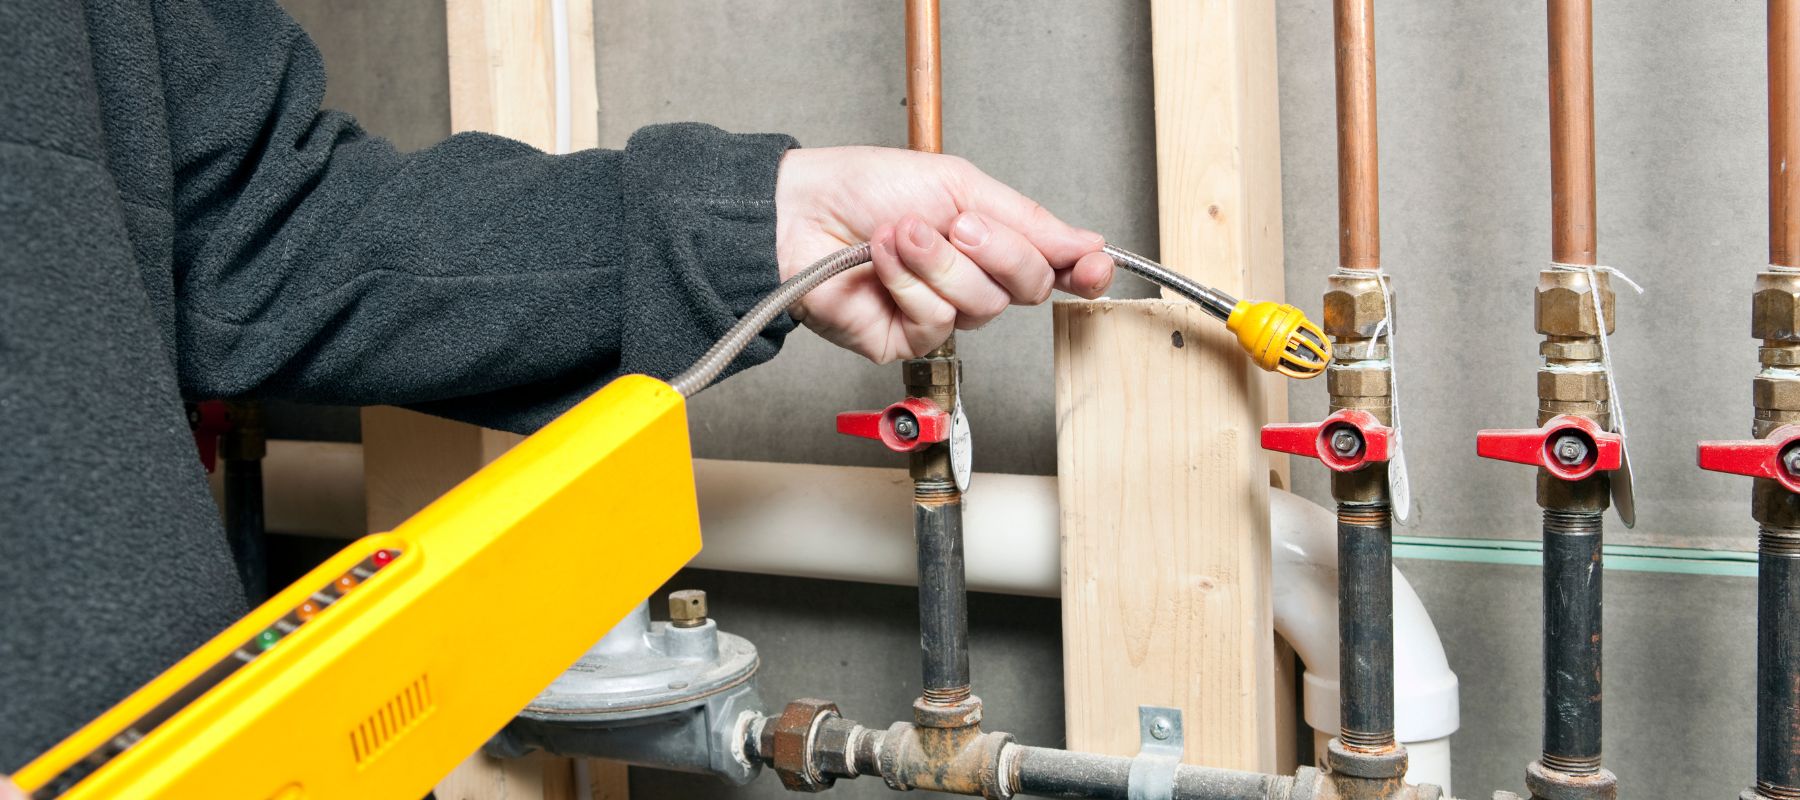 gas line plumber using a tool